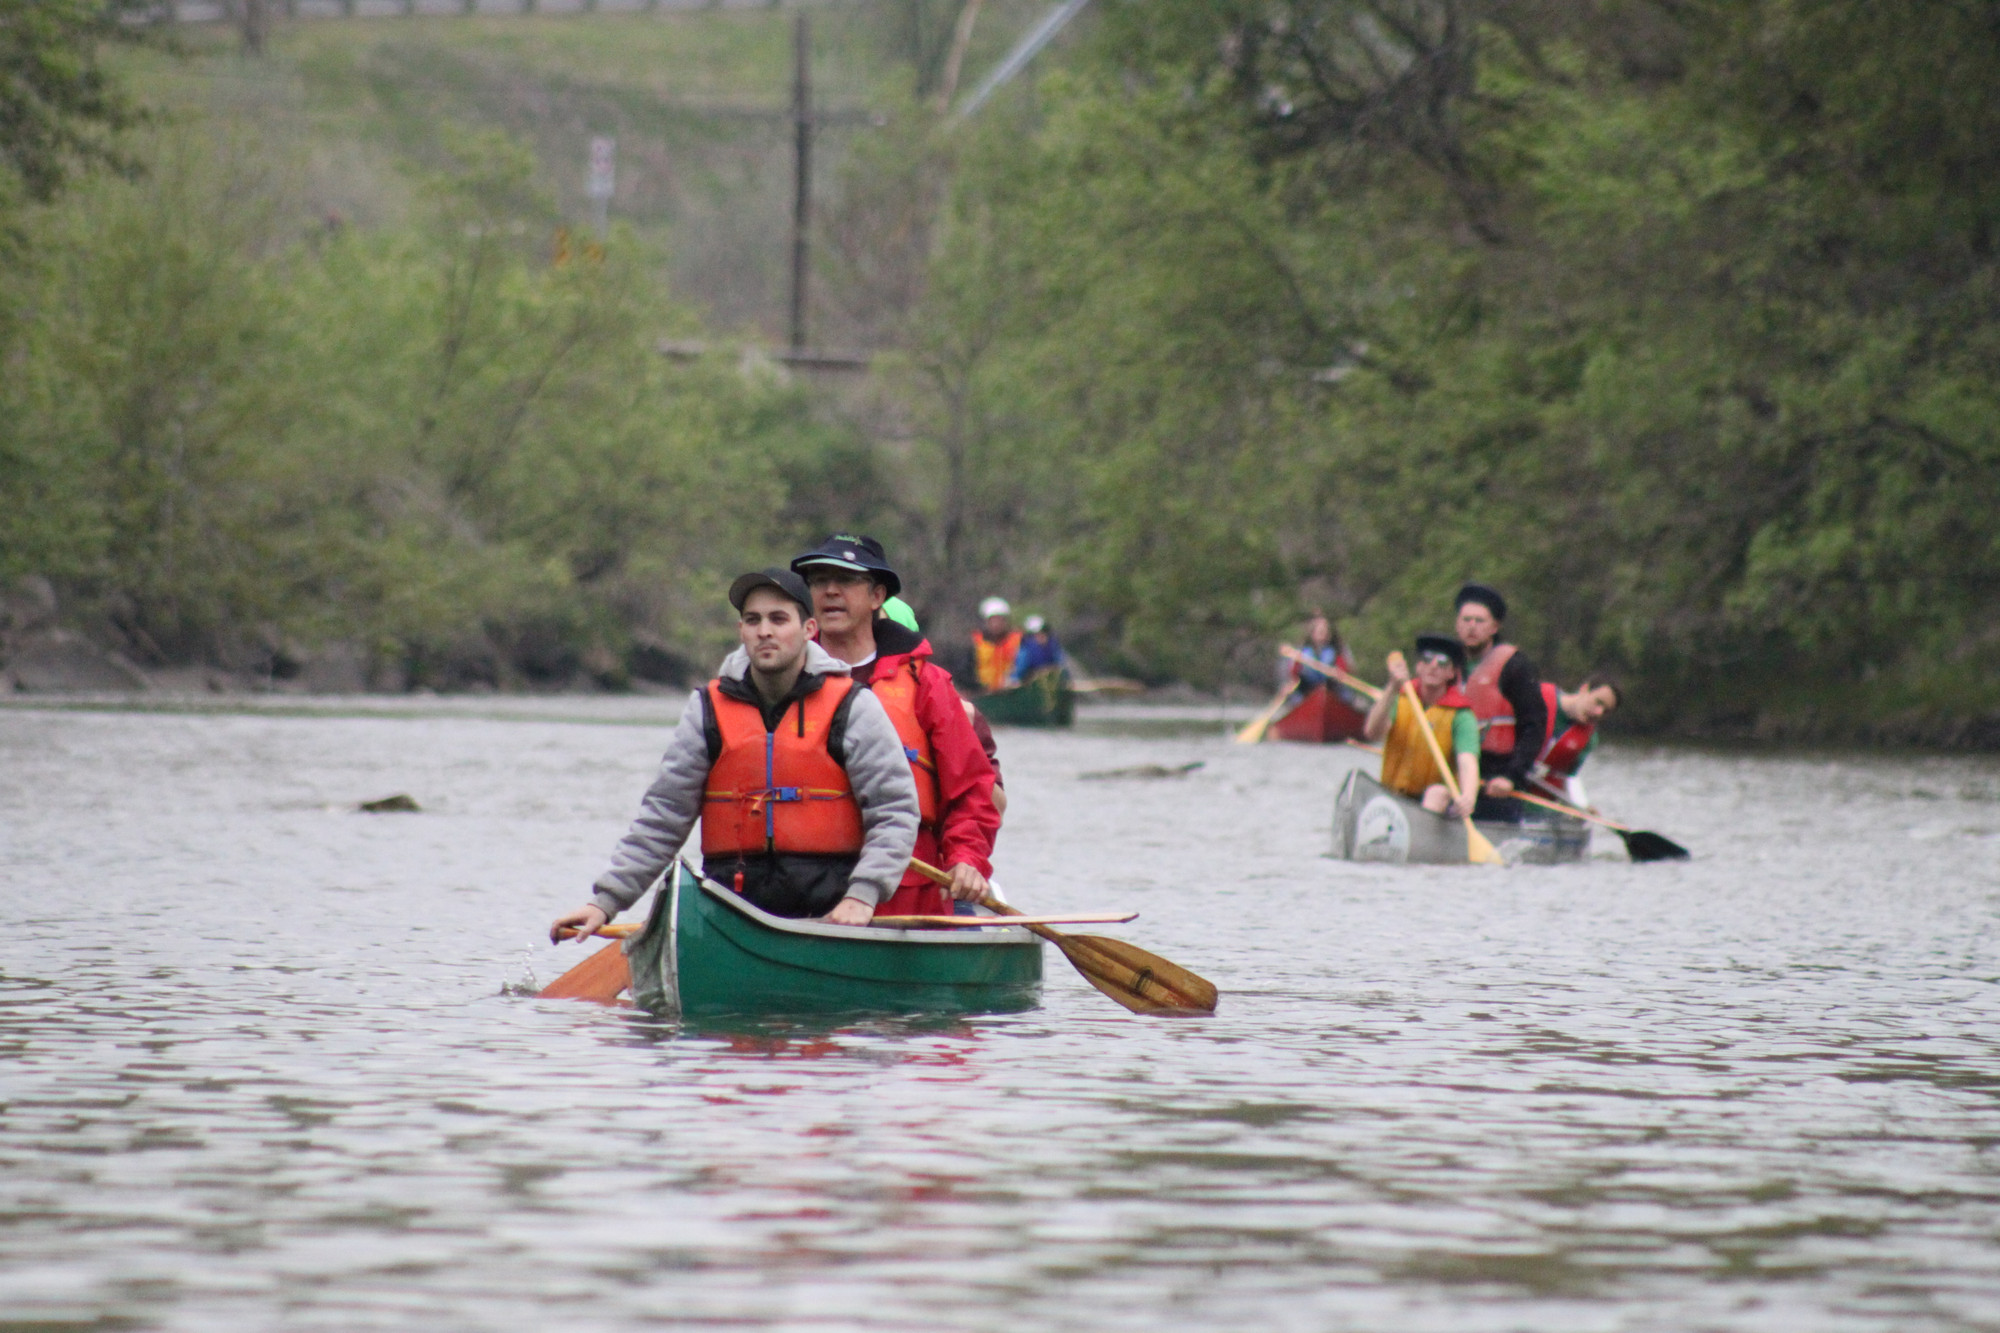 People in canoes paddling down a river